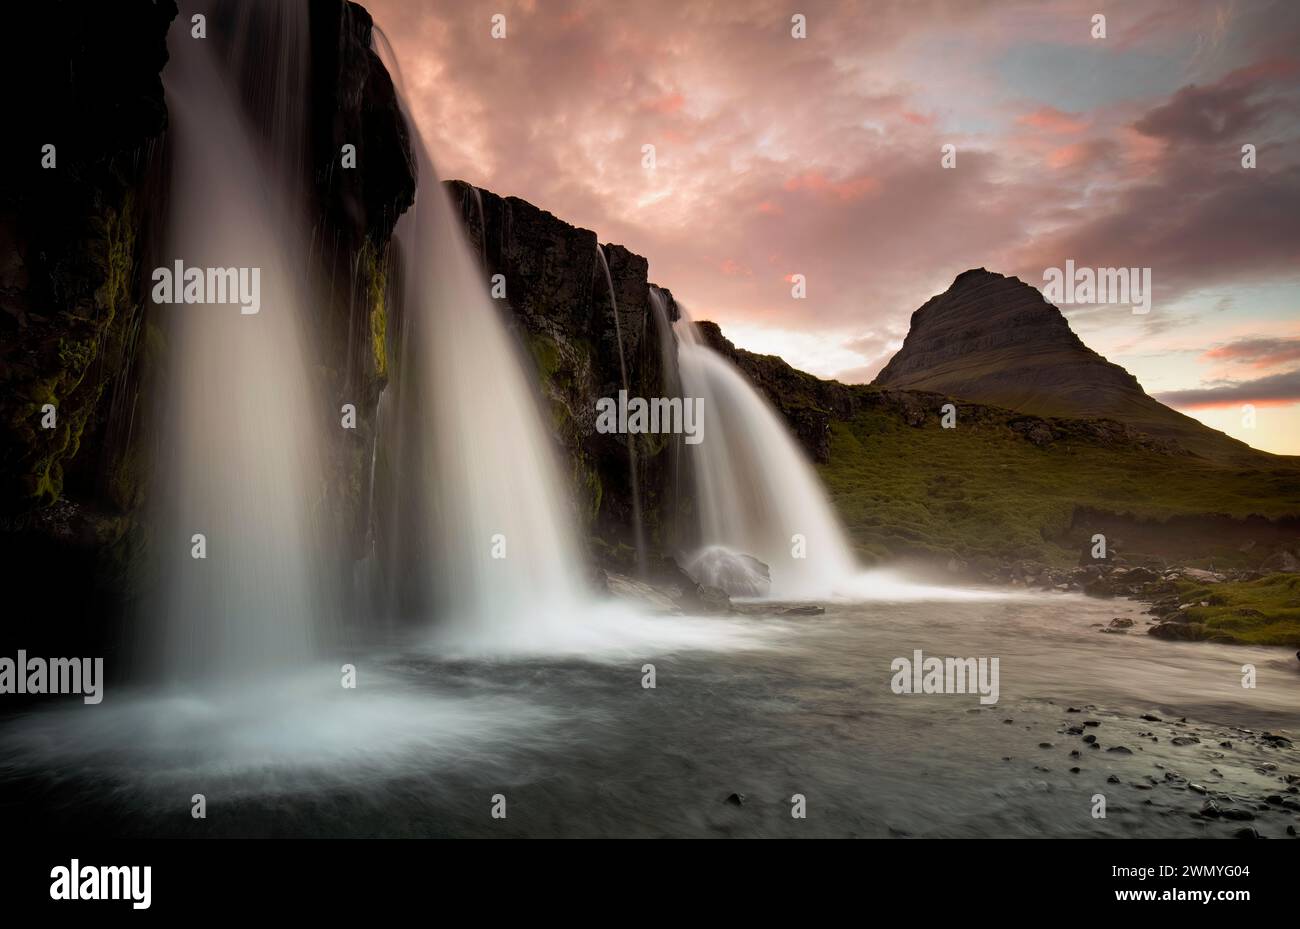 Smooth cascades of a majestic waterfall with the iconic Kirkjufell mountain at sunset in the background, captured in Iceland. Stock Photo